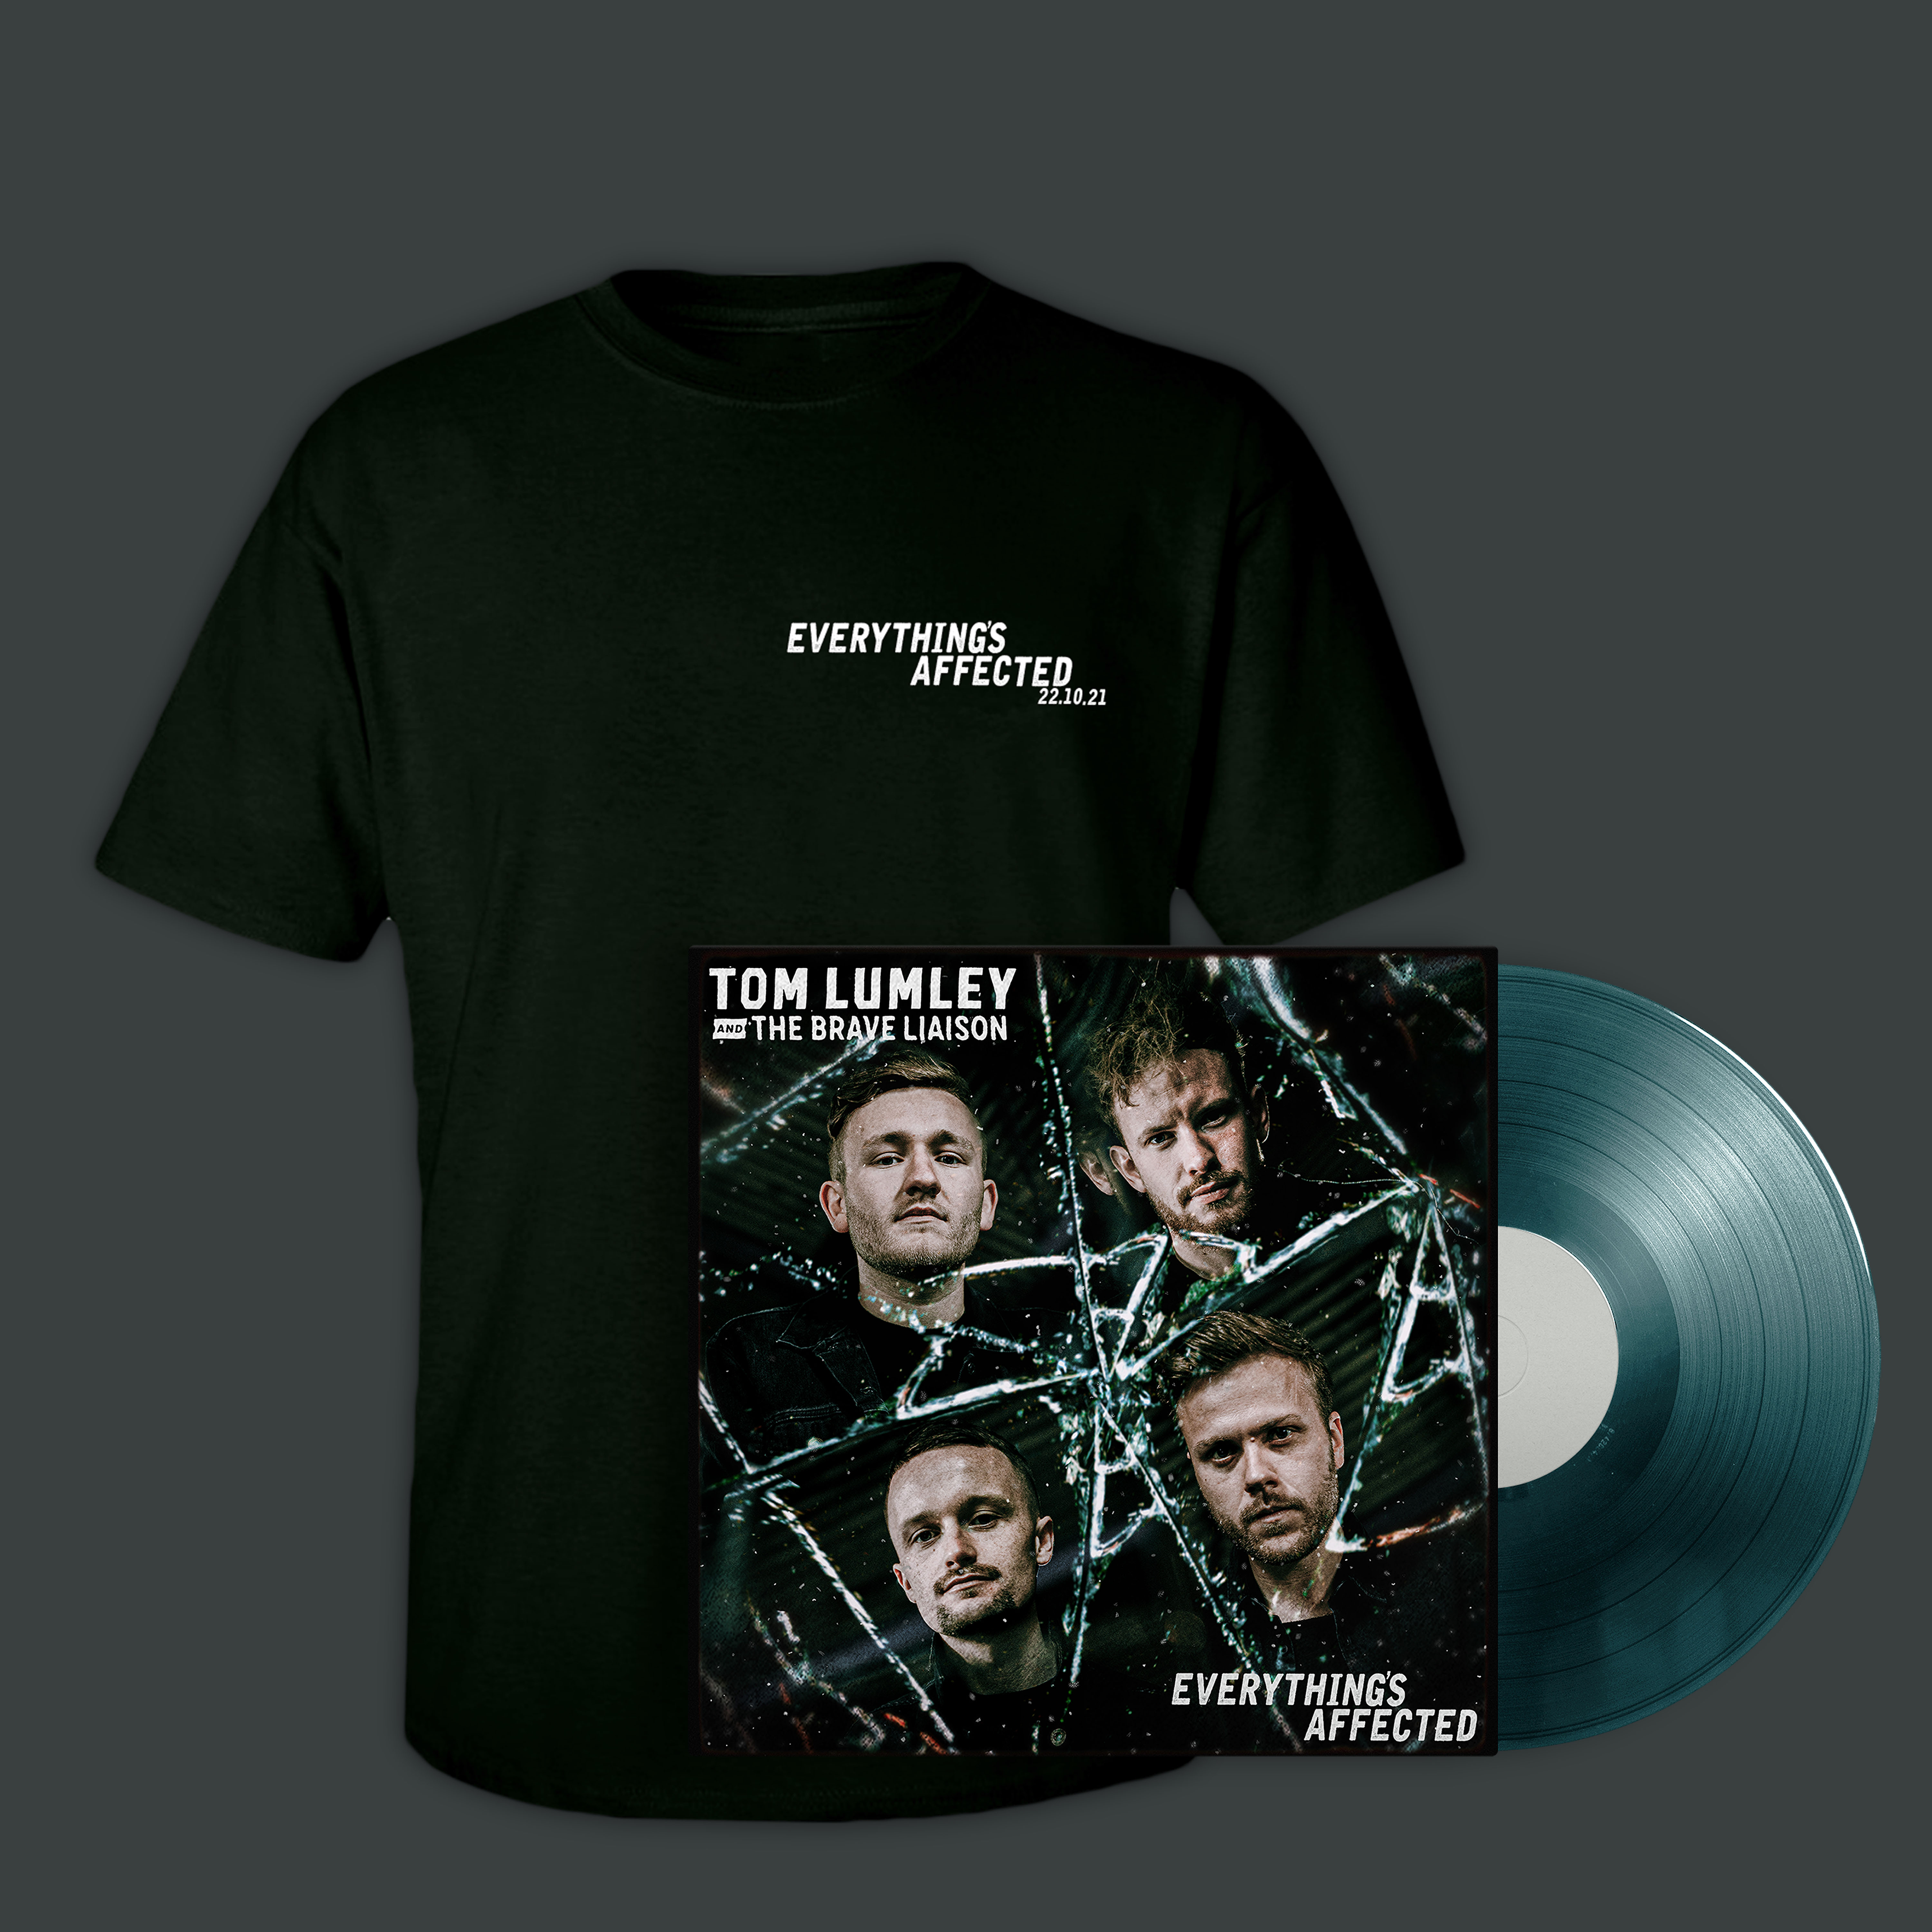 EVERYTHING’S AFFECTED VINYL & T-SHIRT - Tom Lumley and The Brave Liaison